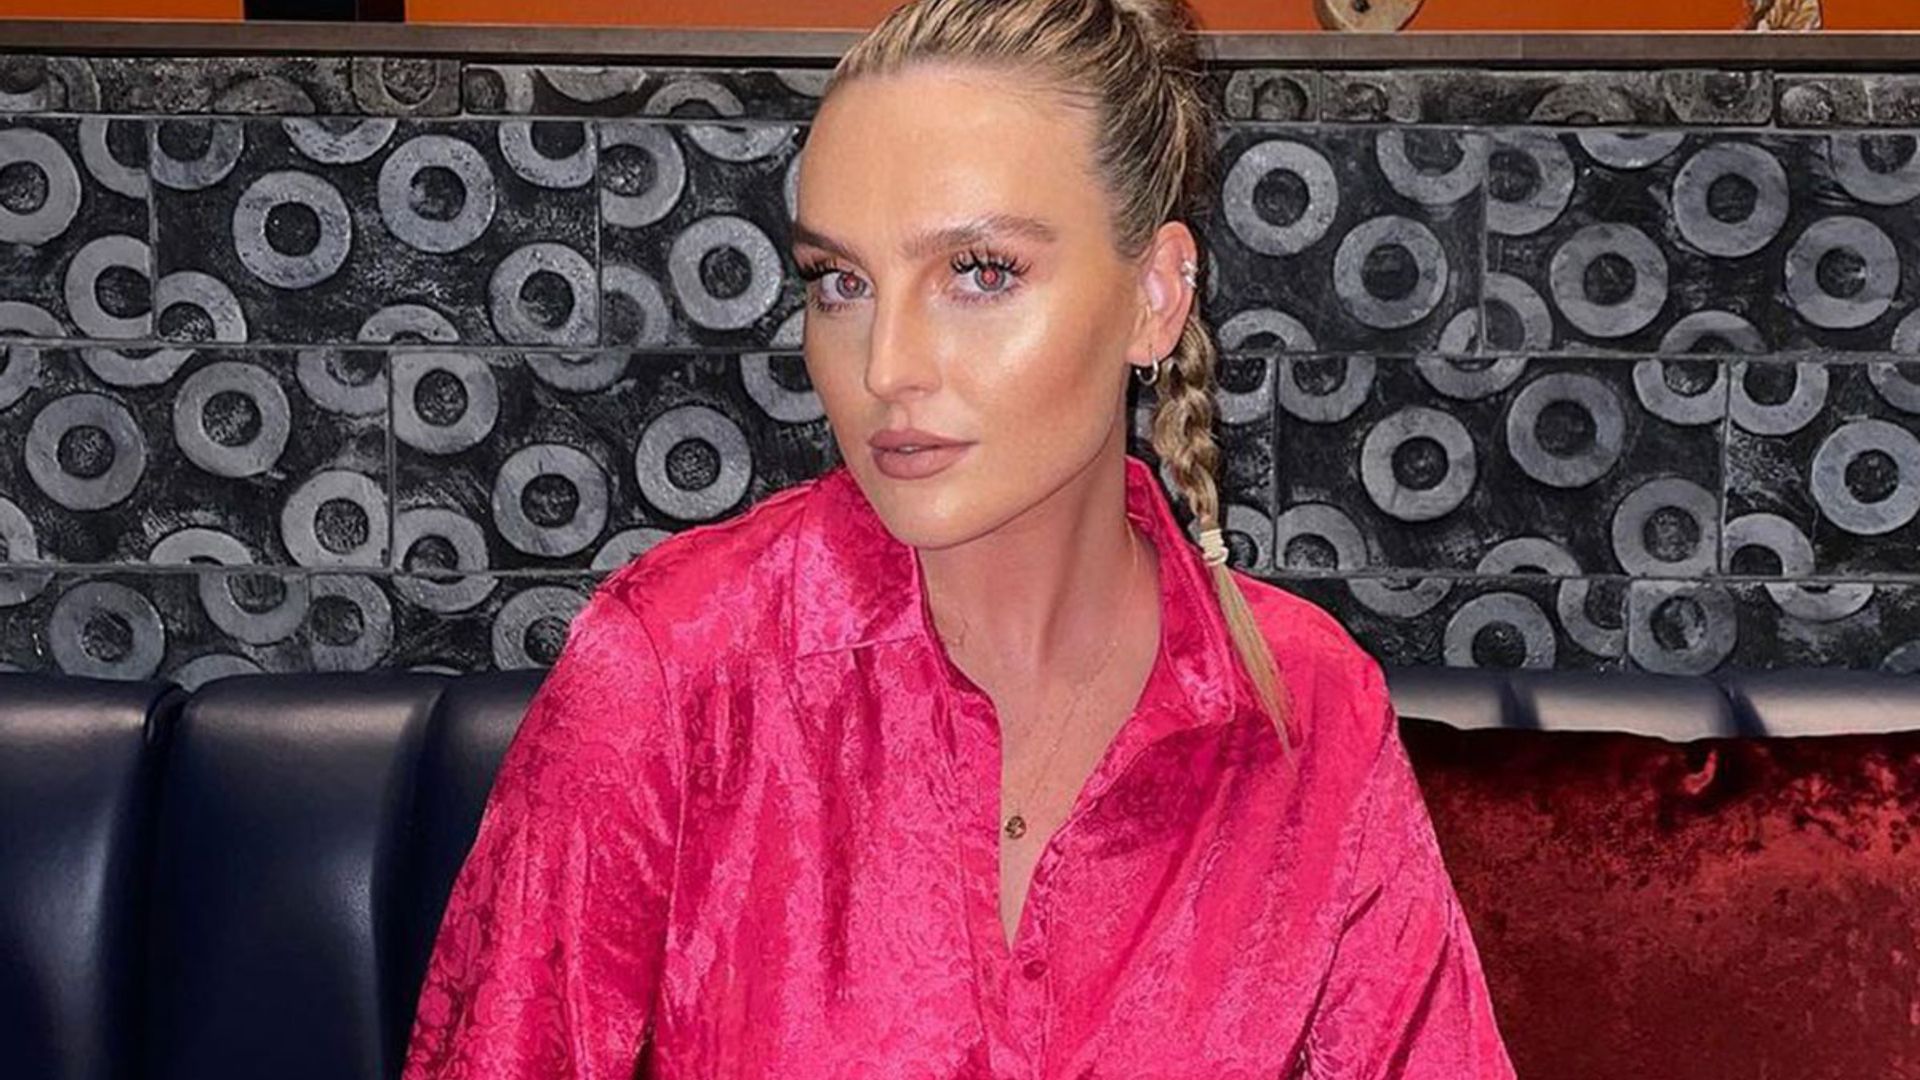 Perrie Edwards' holiday diet looks unbelievable – and we're jealous